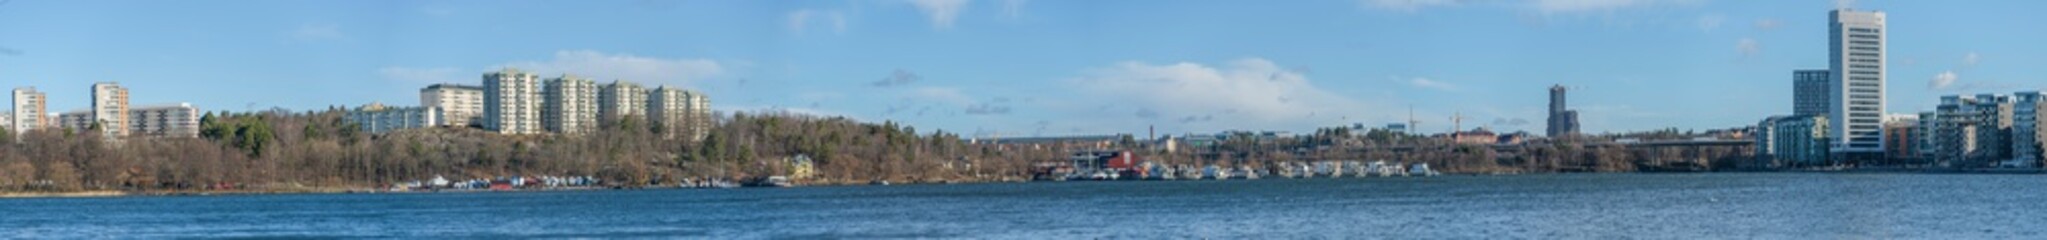 View from the Stockholm district Traneberg over the bay Ulvsundasjön surrounded by the town Solna and the district Kristineberg, jetty, pier and buoys a sunny winter day.